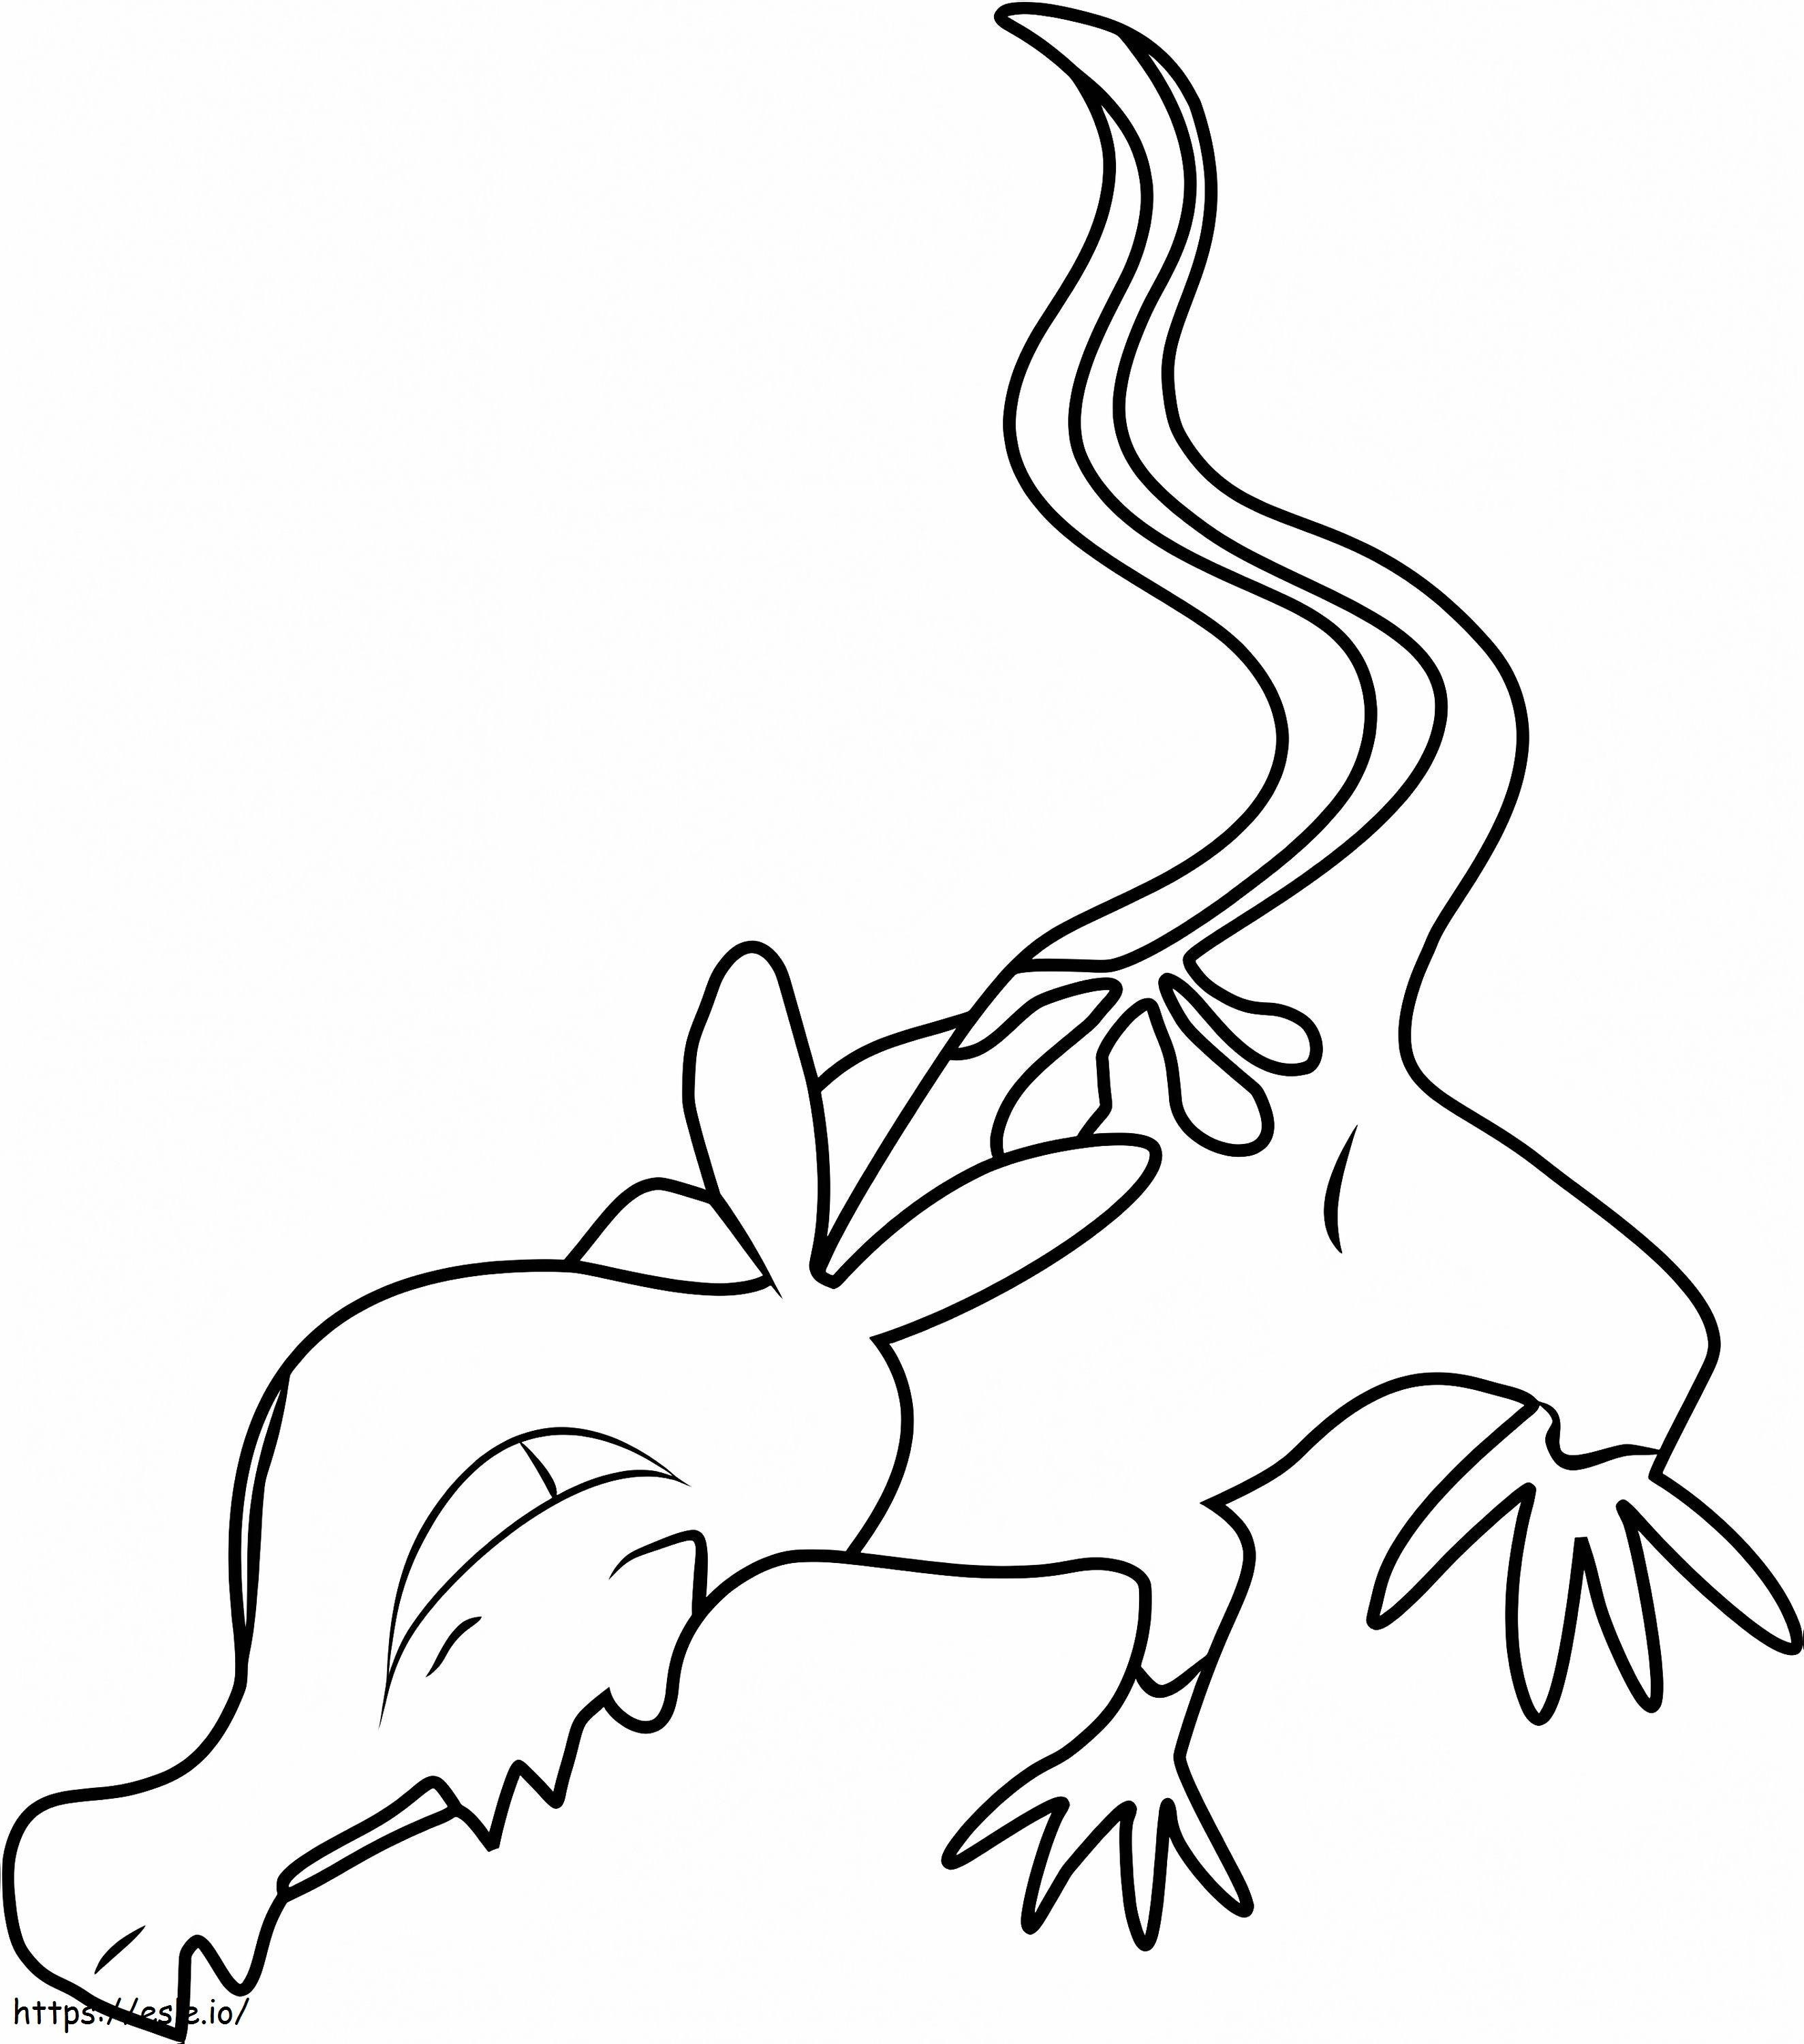 1529894198 26 coloring page